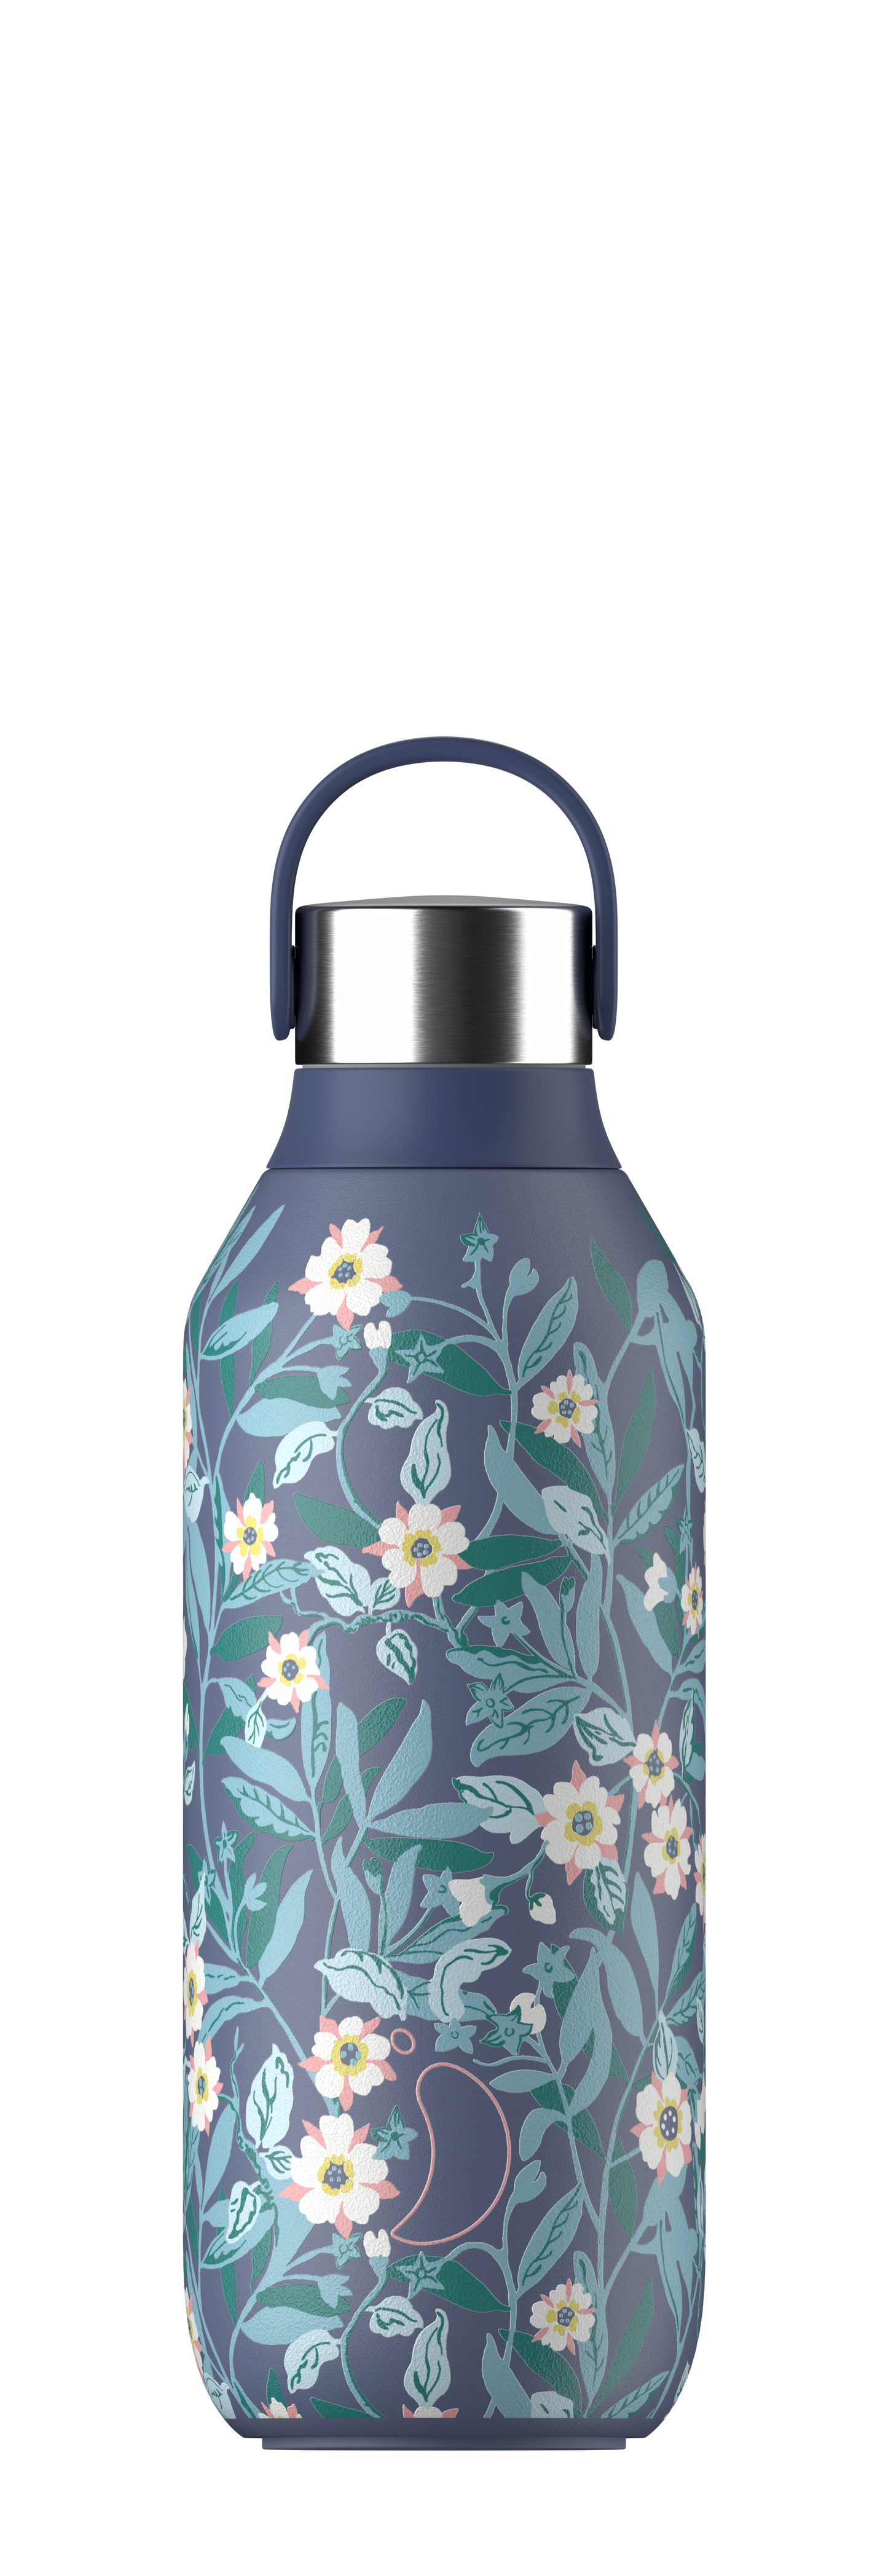 Series 2 Liberty Chilly's Bottle - Brighton Blossom Whale Blue 500 ml